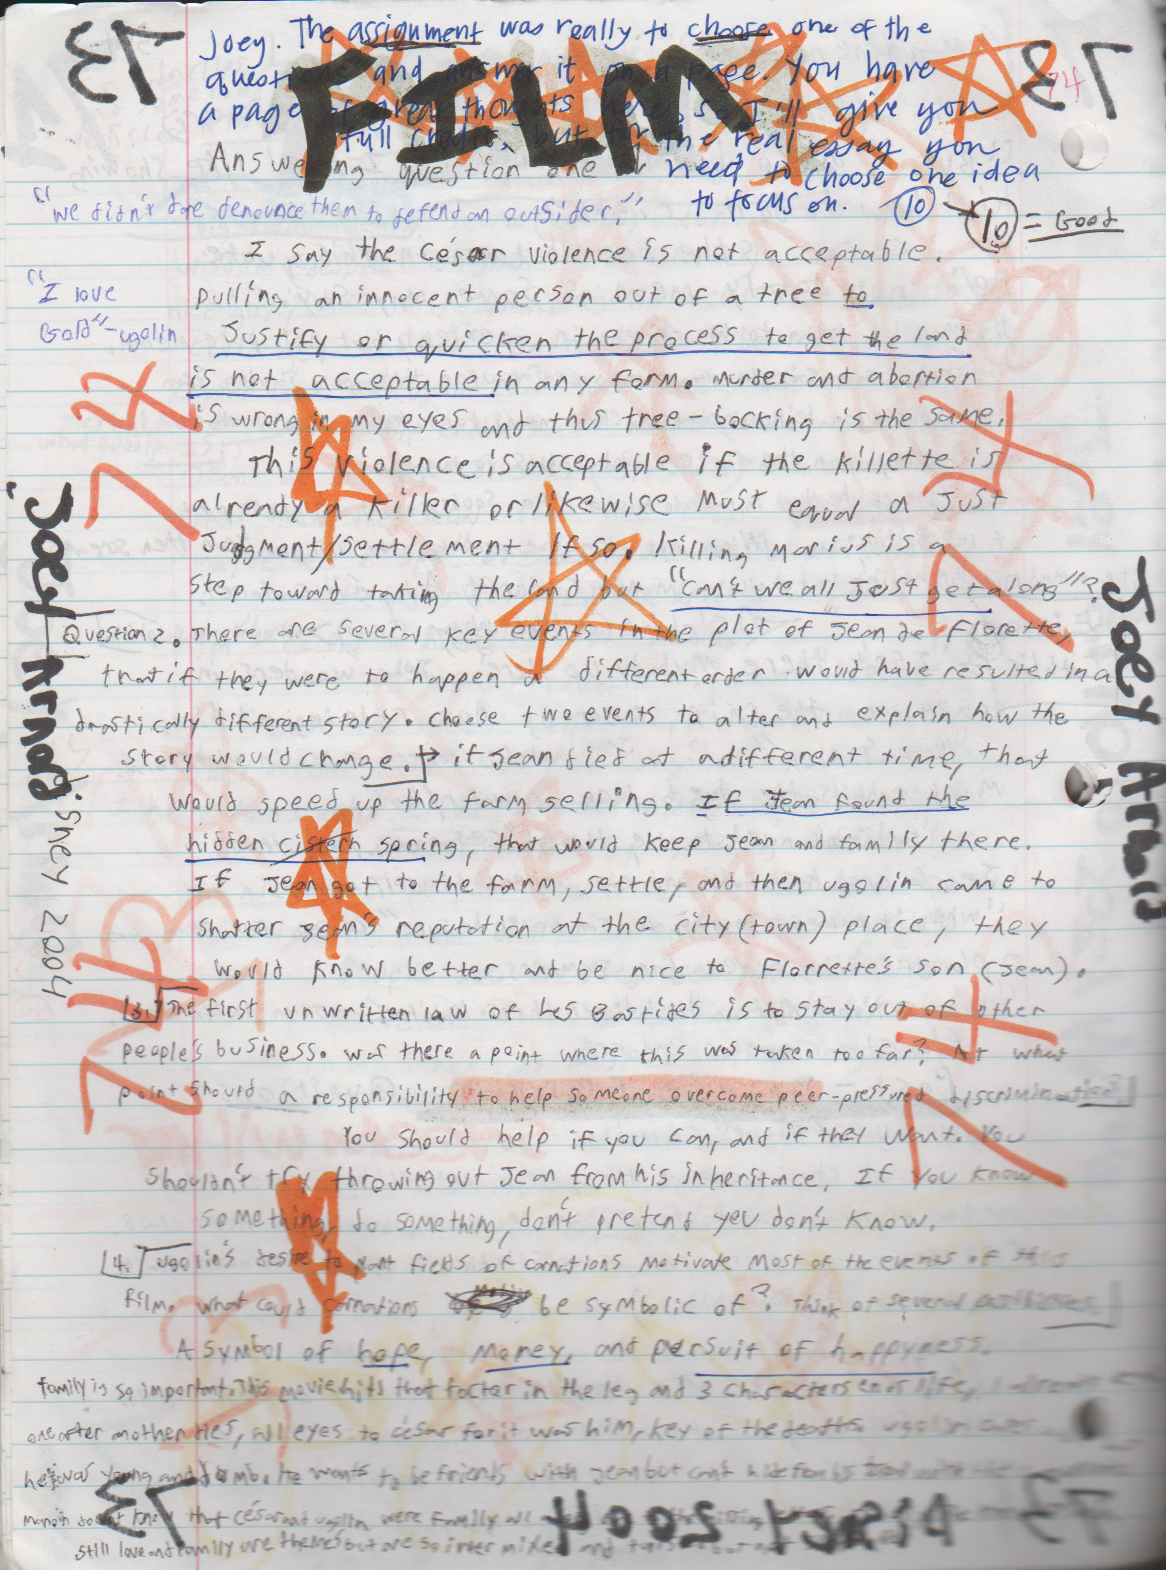 2004-01-29 - Thursday - Carpetball FGHS Senior Project Journal, Joey Arnold, Part 02, 96pages numbered, Notebook-72.png